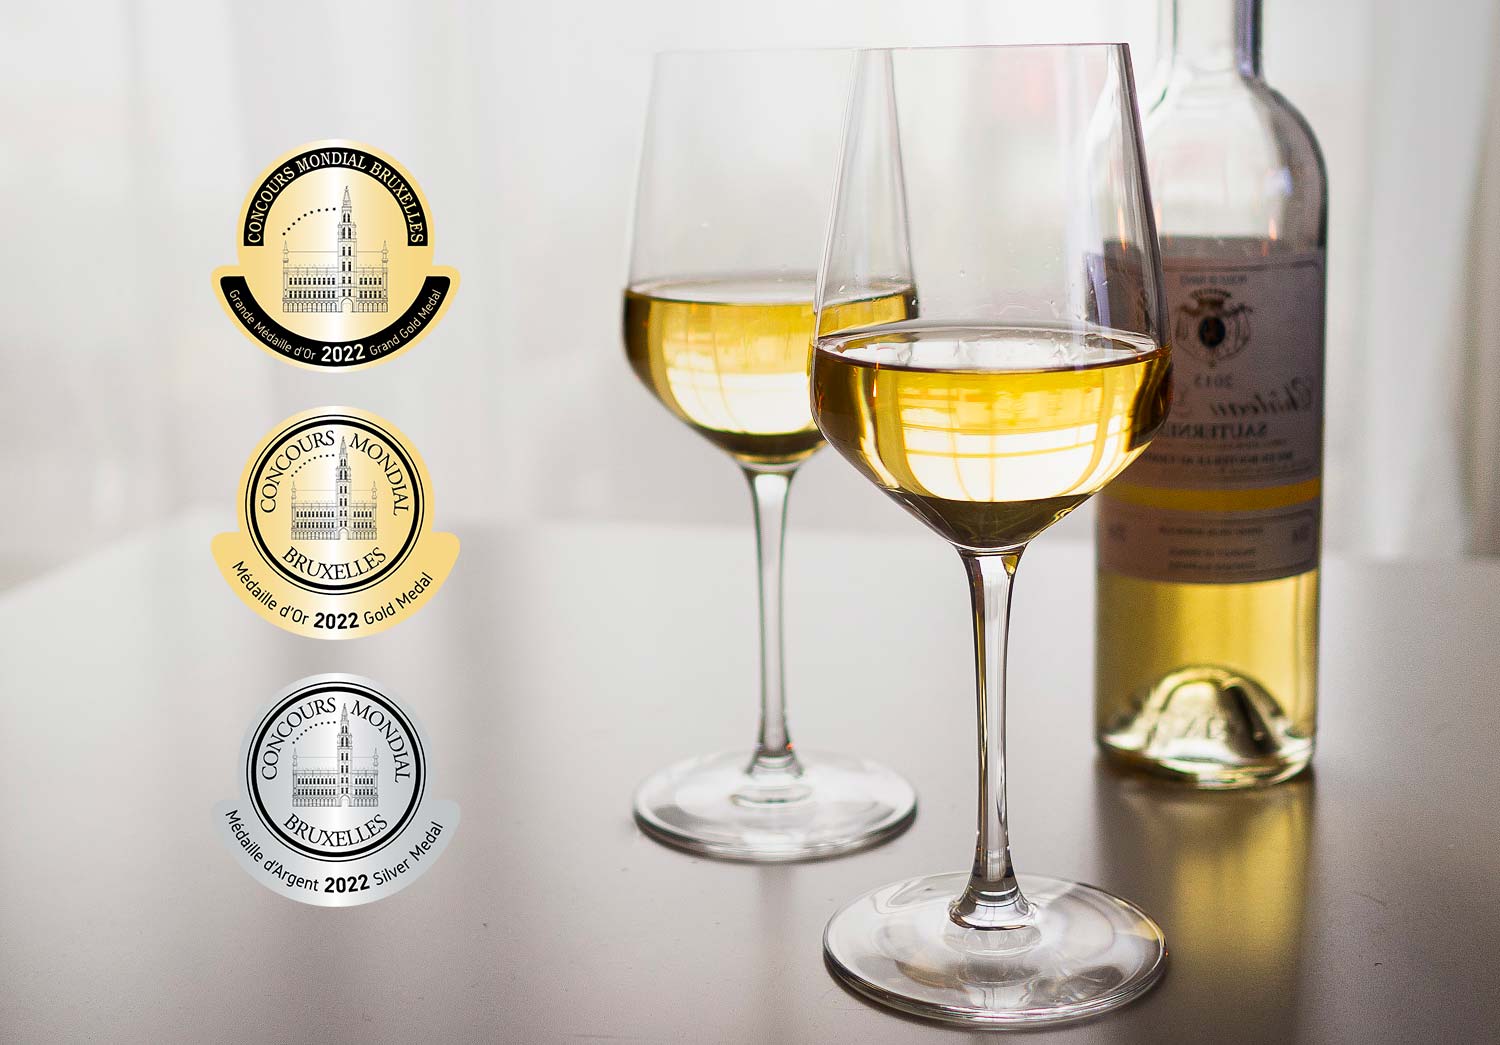 The results are out for sweet and fortified wines!